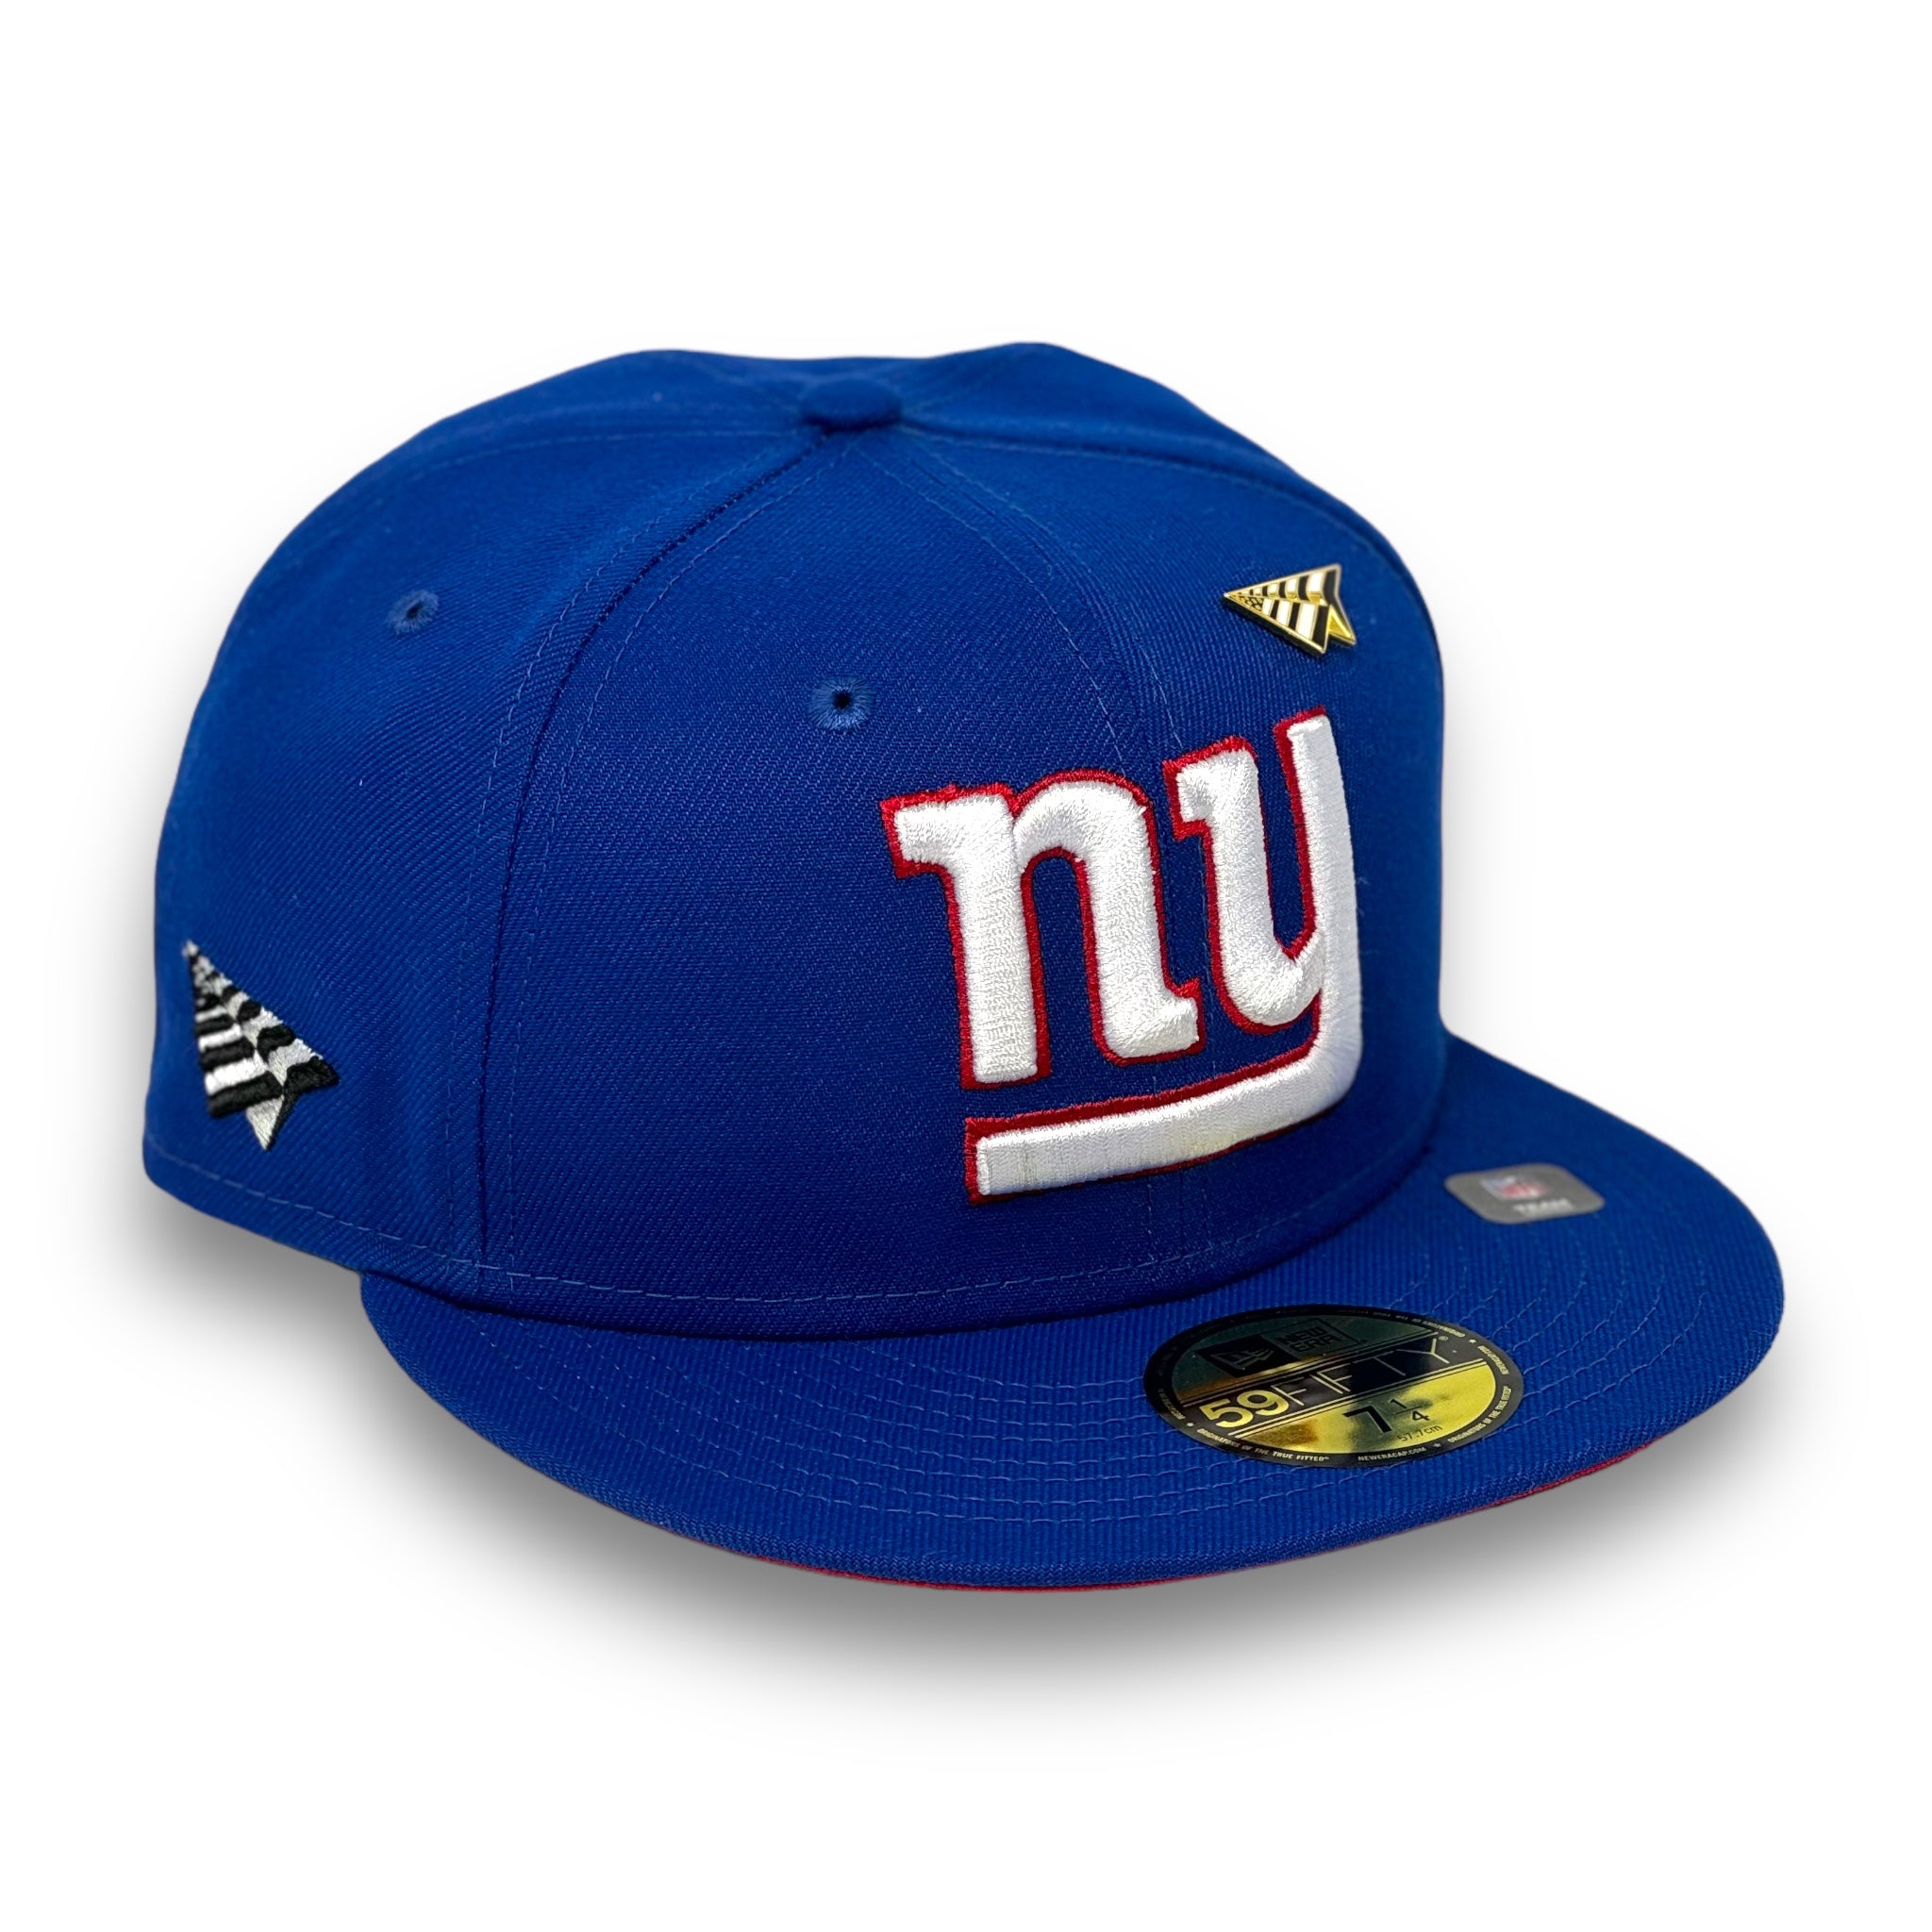 PAPER PLANES X NEW YORK GIANTS 59FIFTY FITTED